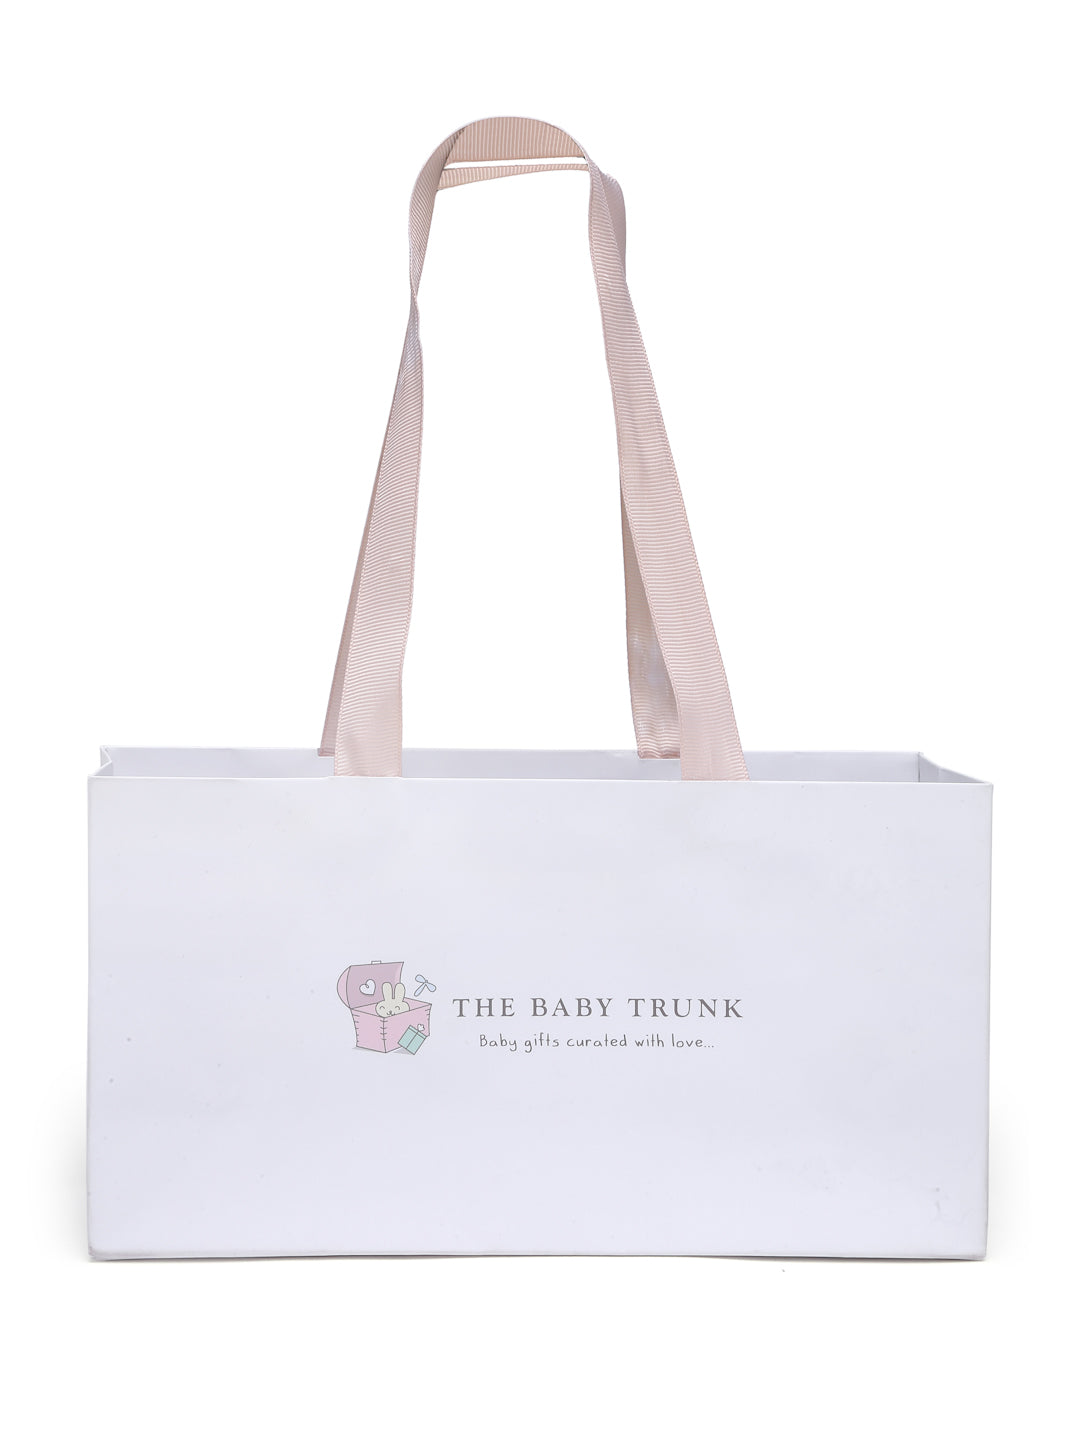 Small Paper Bags Online